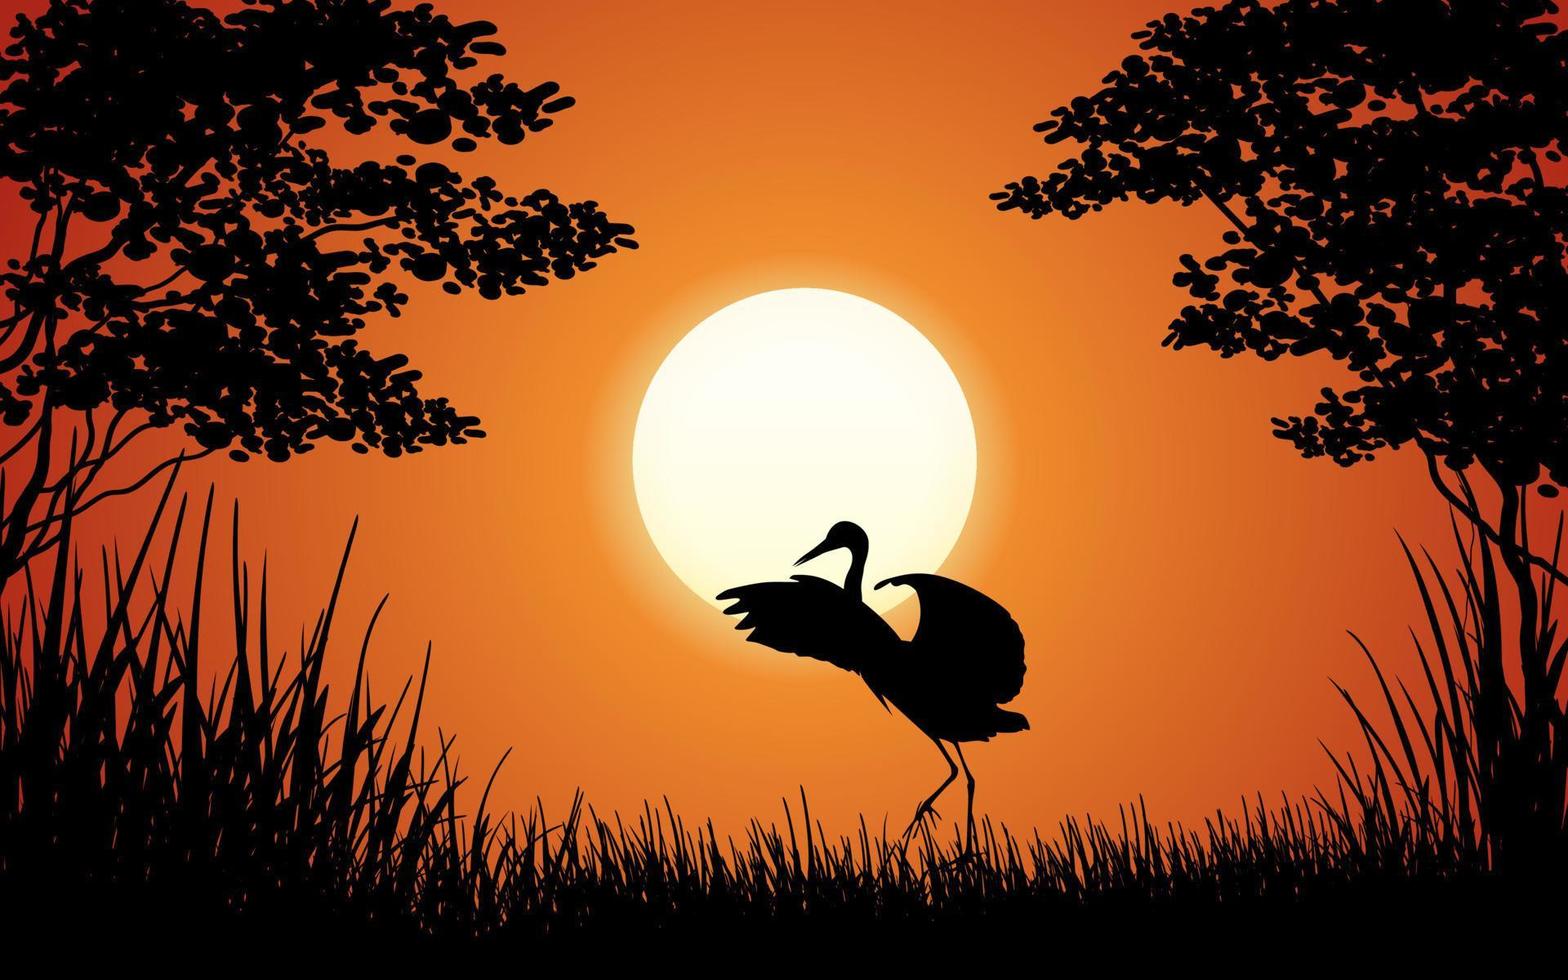 Birds silhouette on red sunset nature background vector